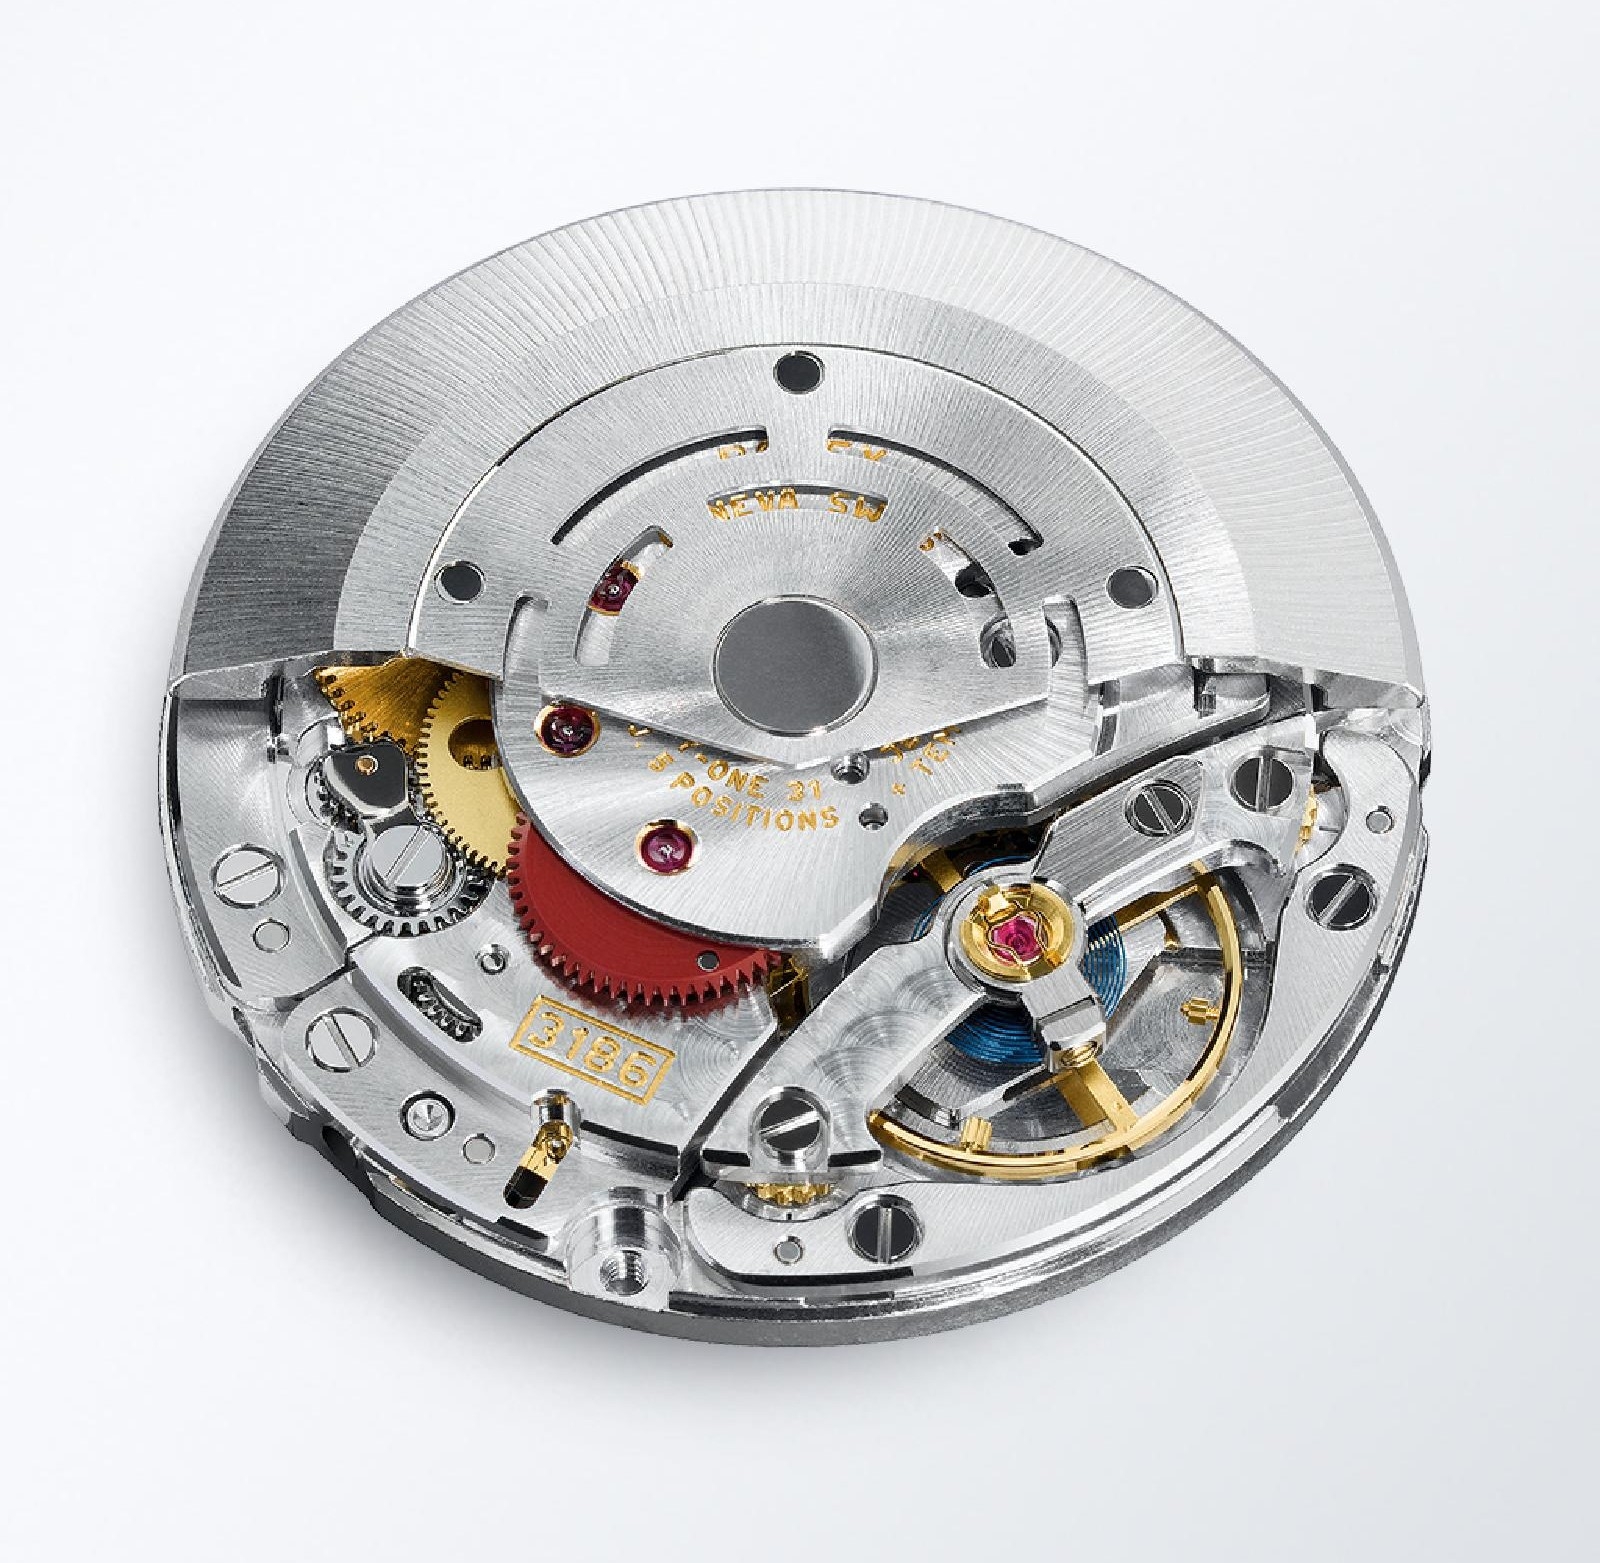 rolex 16710 with 3186 movement